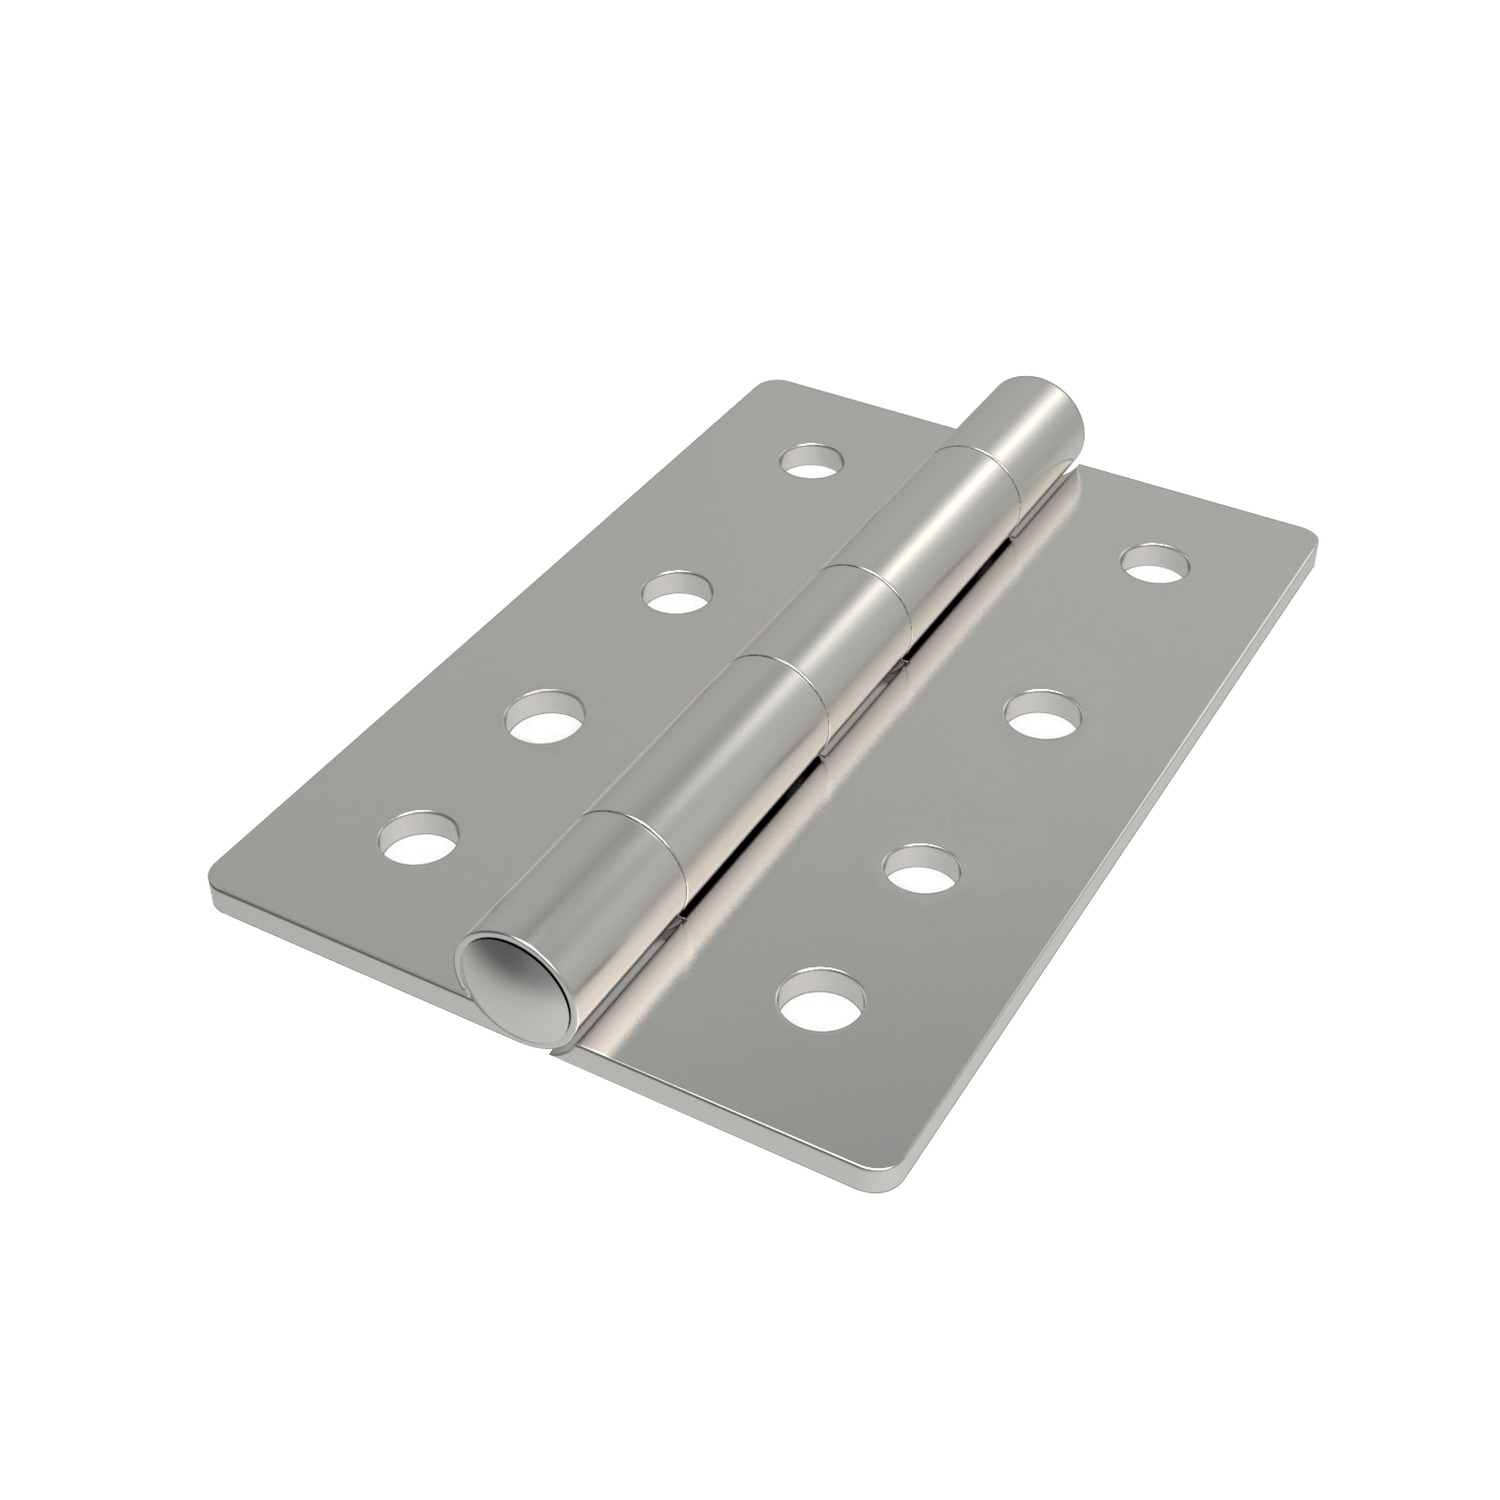 S0780.AC0050 Surface Mount - Leaf Hinges Screw mount - Stainless steel. 50 x 35. Also known as 52380.W0050